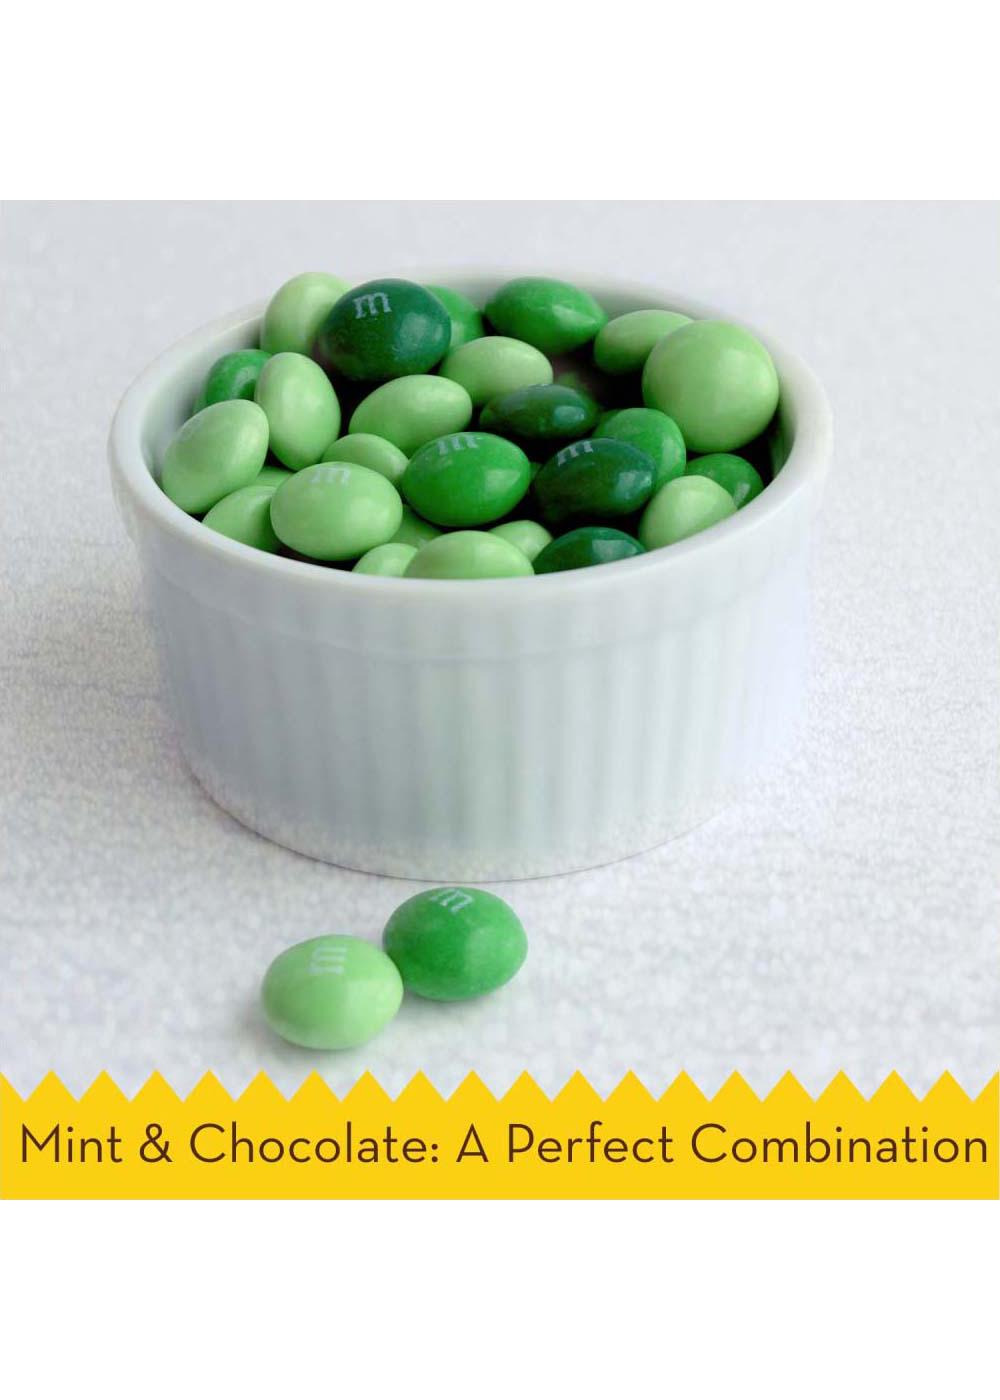 M&M New Flavor Chocolate Candy Sharing Size Pack (Mint)